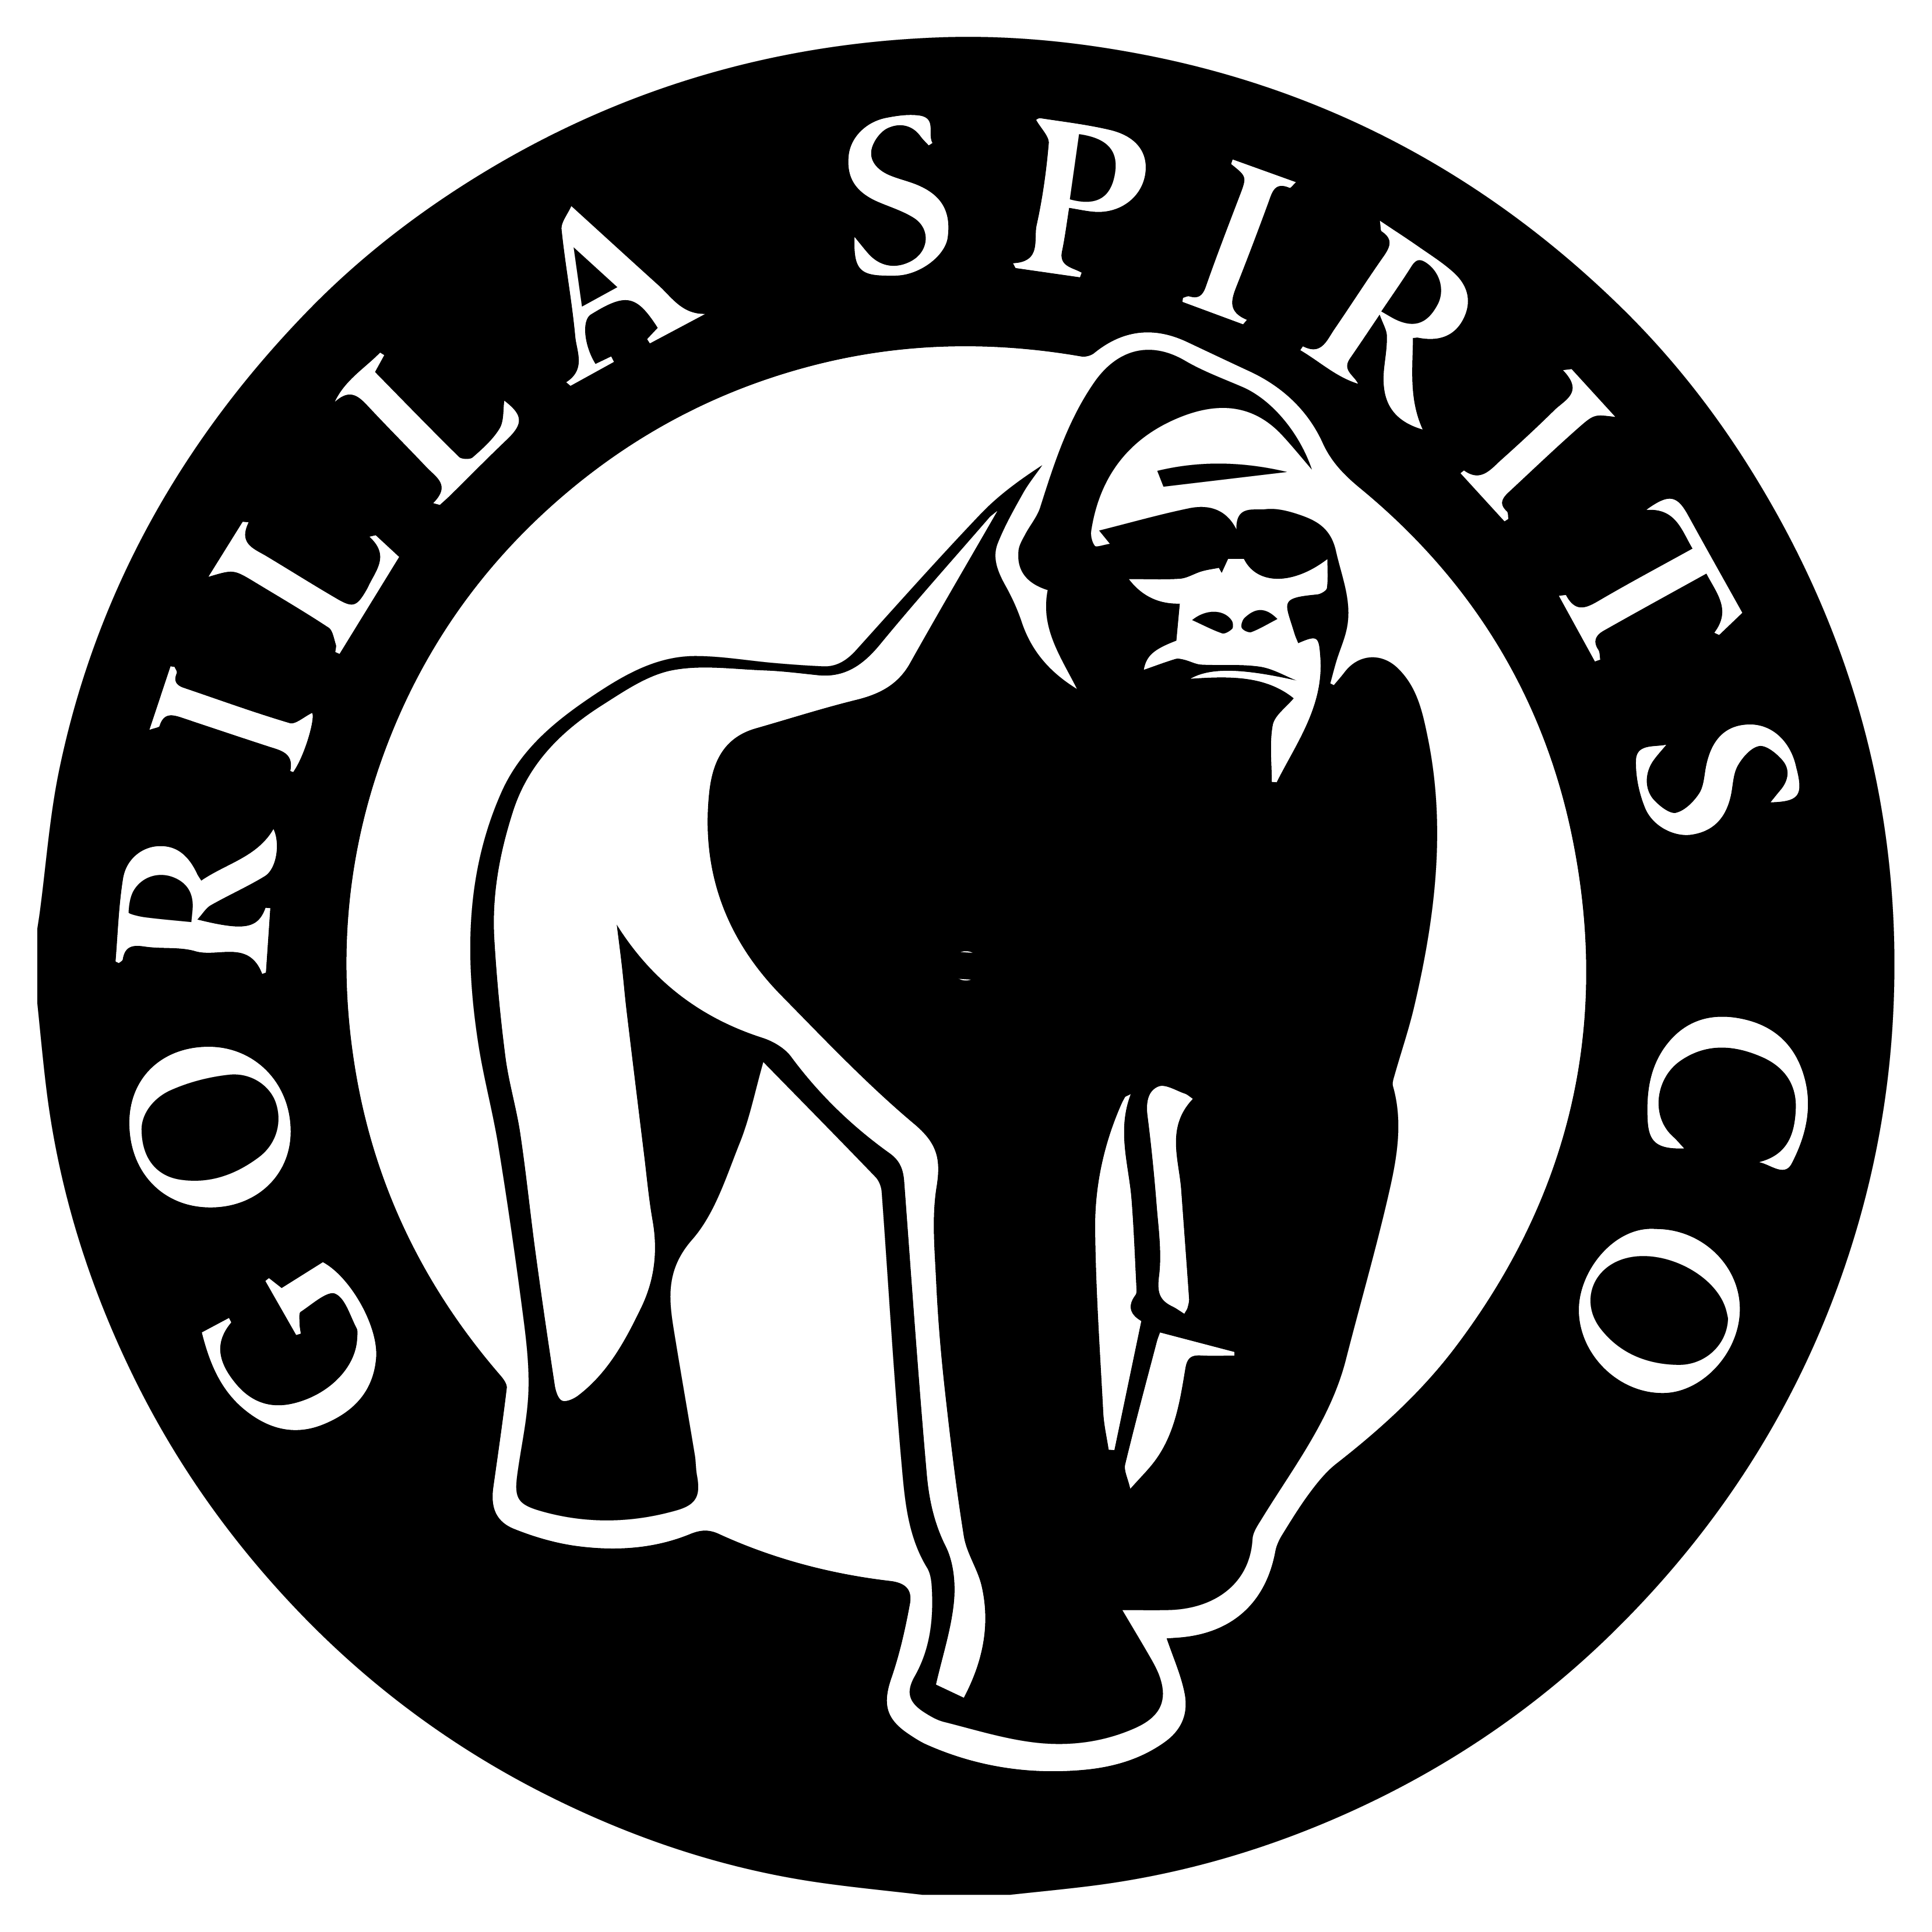 Gorilla clipart strong, Gorilla strong Transparent FREE for download on ...